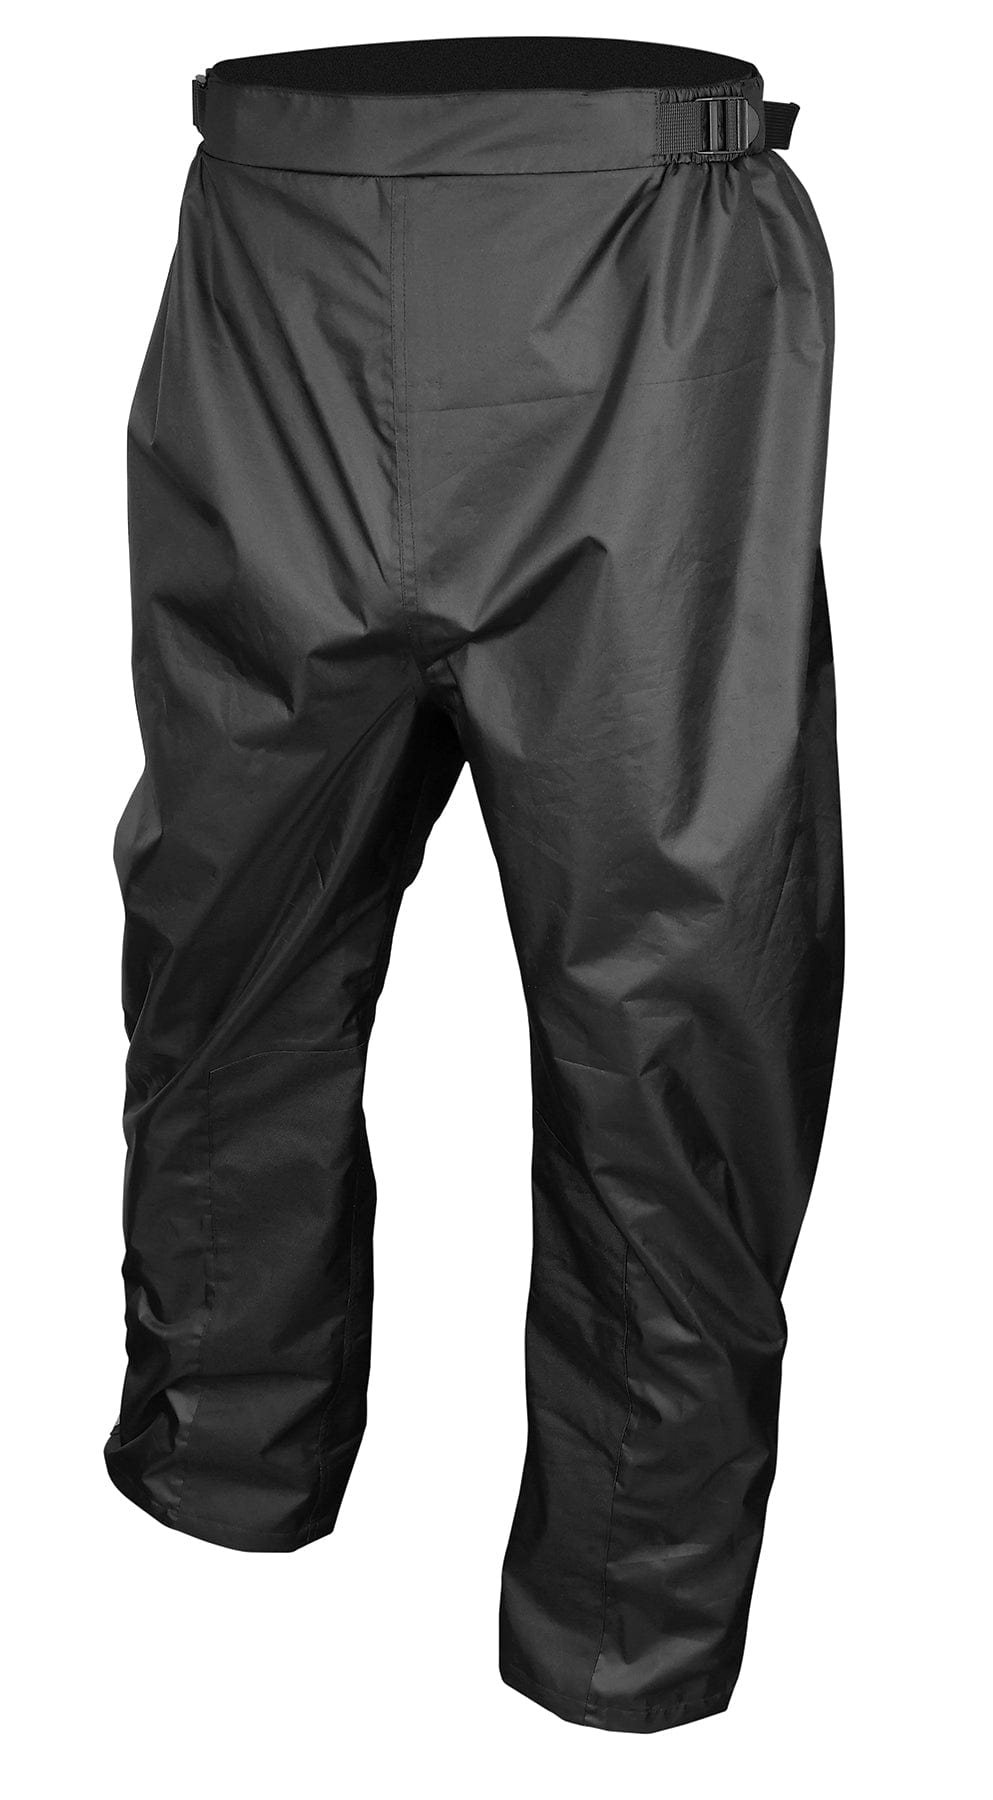 Western Powersports Pants Black / 2X Solo Storm Pants By Nelson-Rigg SSP-05-XX